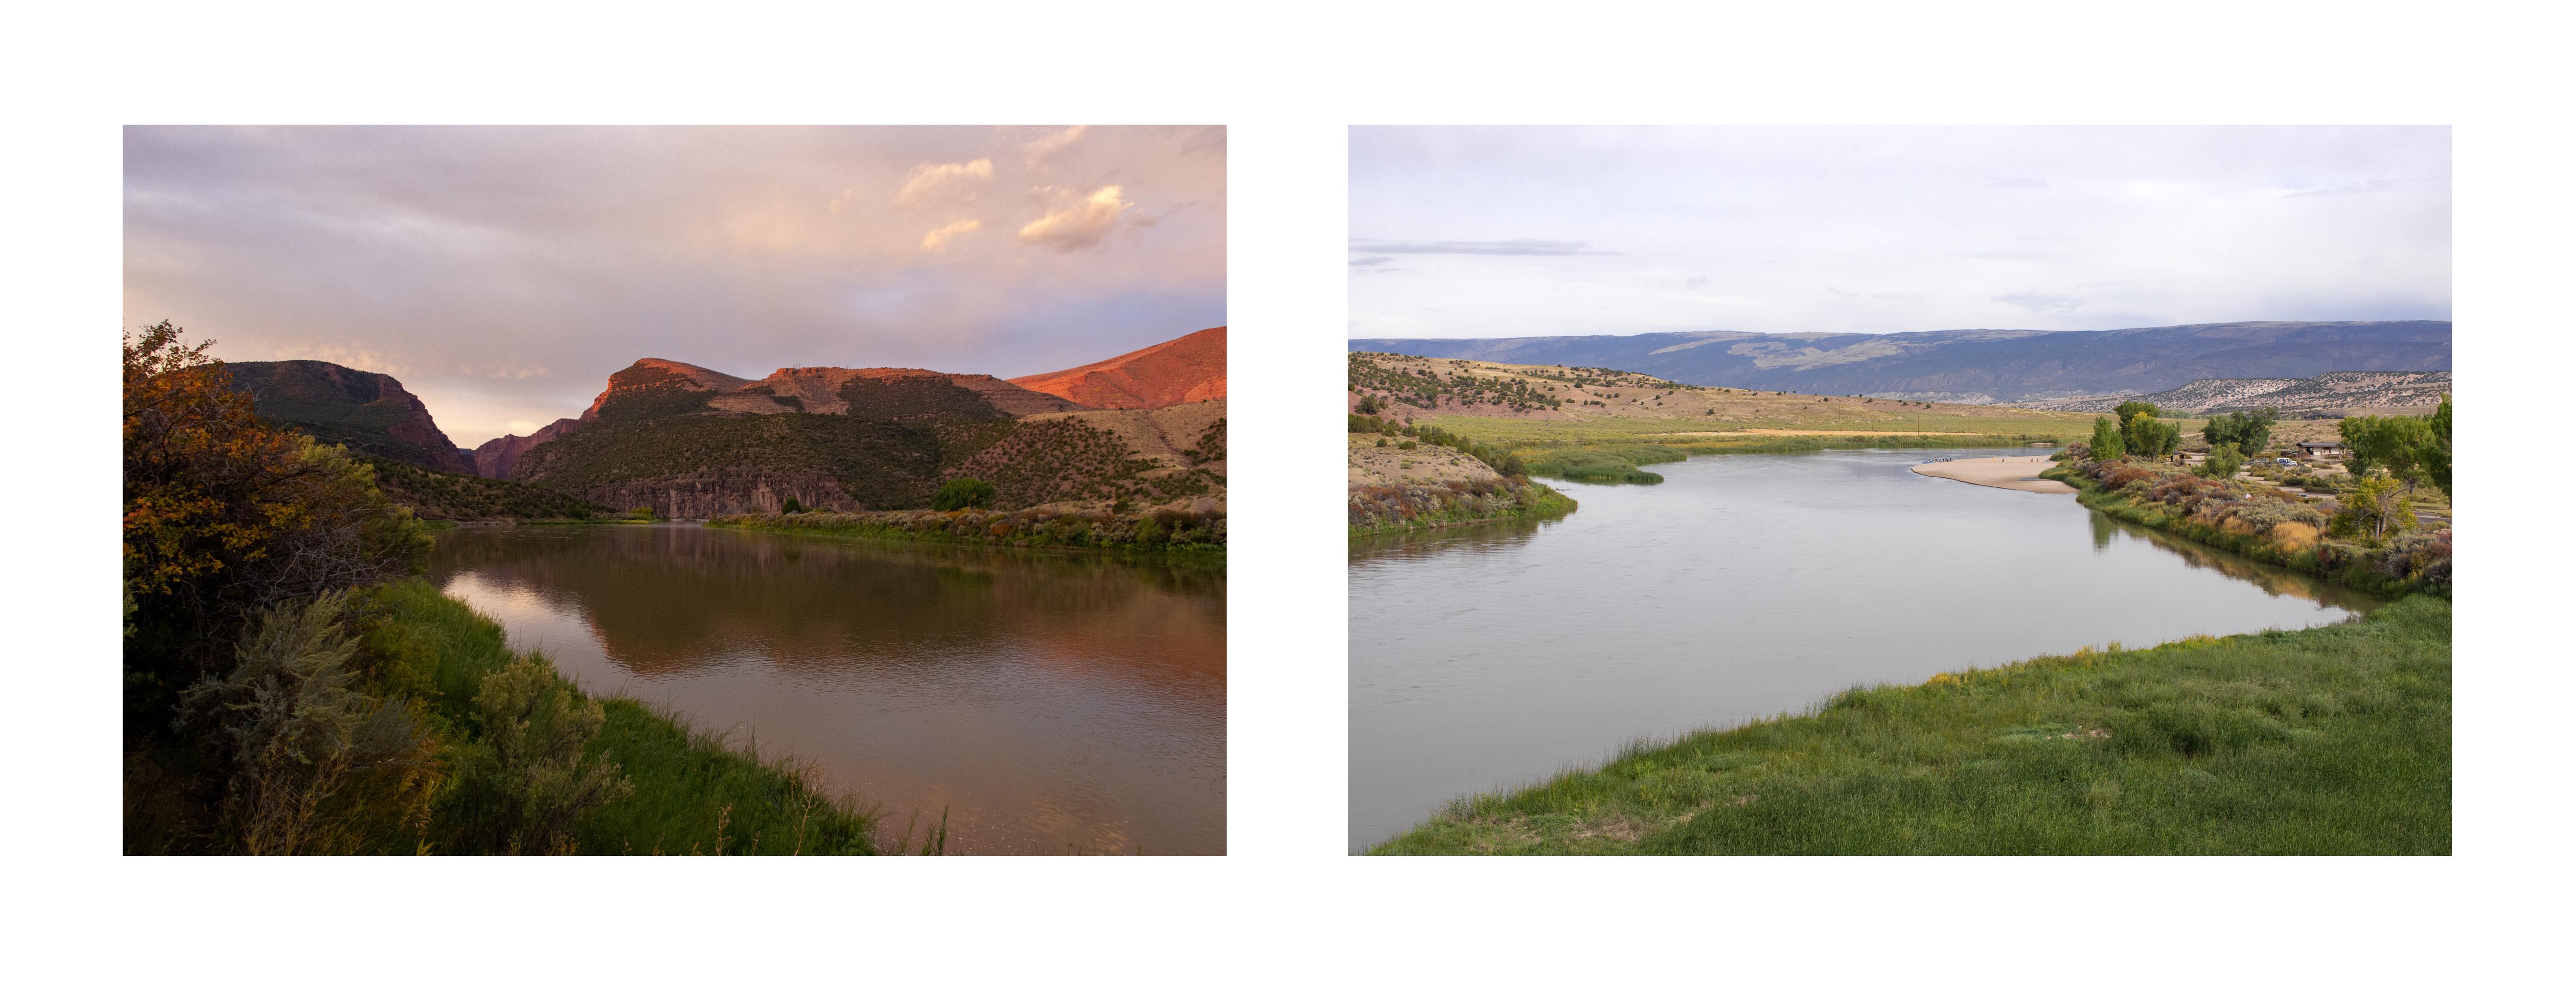 Edie Winograde Color Photograph - diptych "Gates of Lodore, dawn" and "Green River, raft" Landscape Photograph